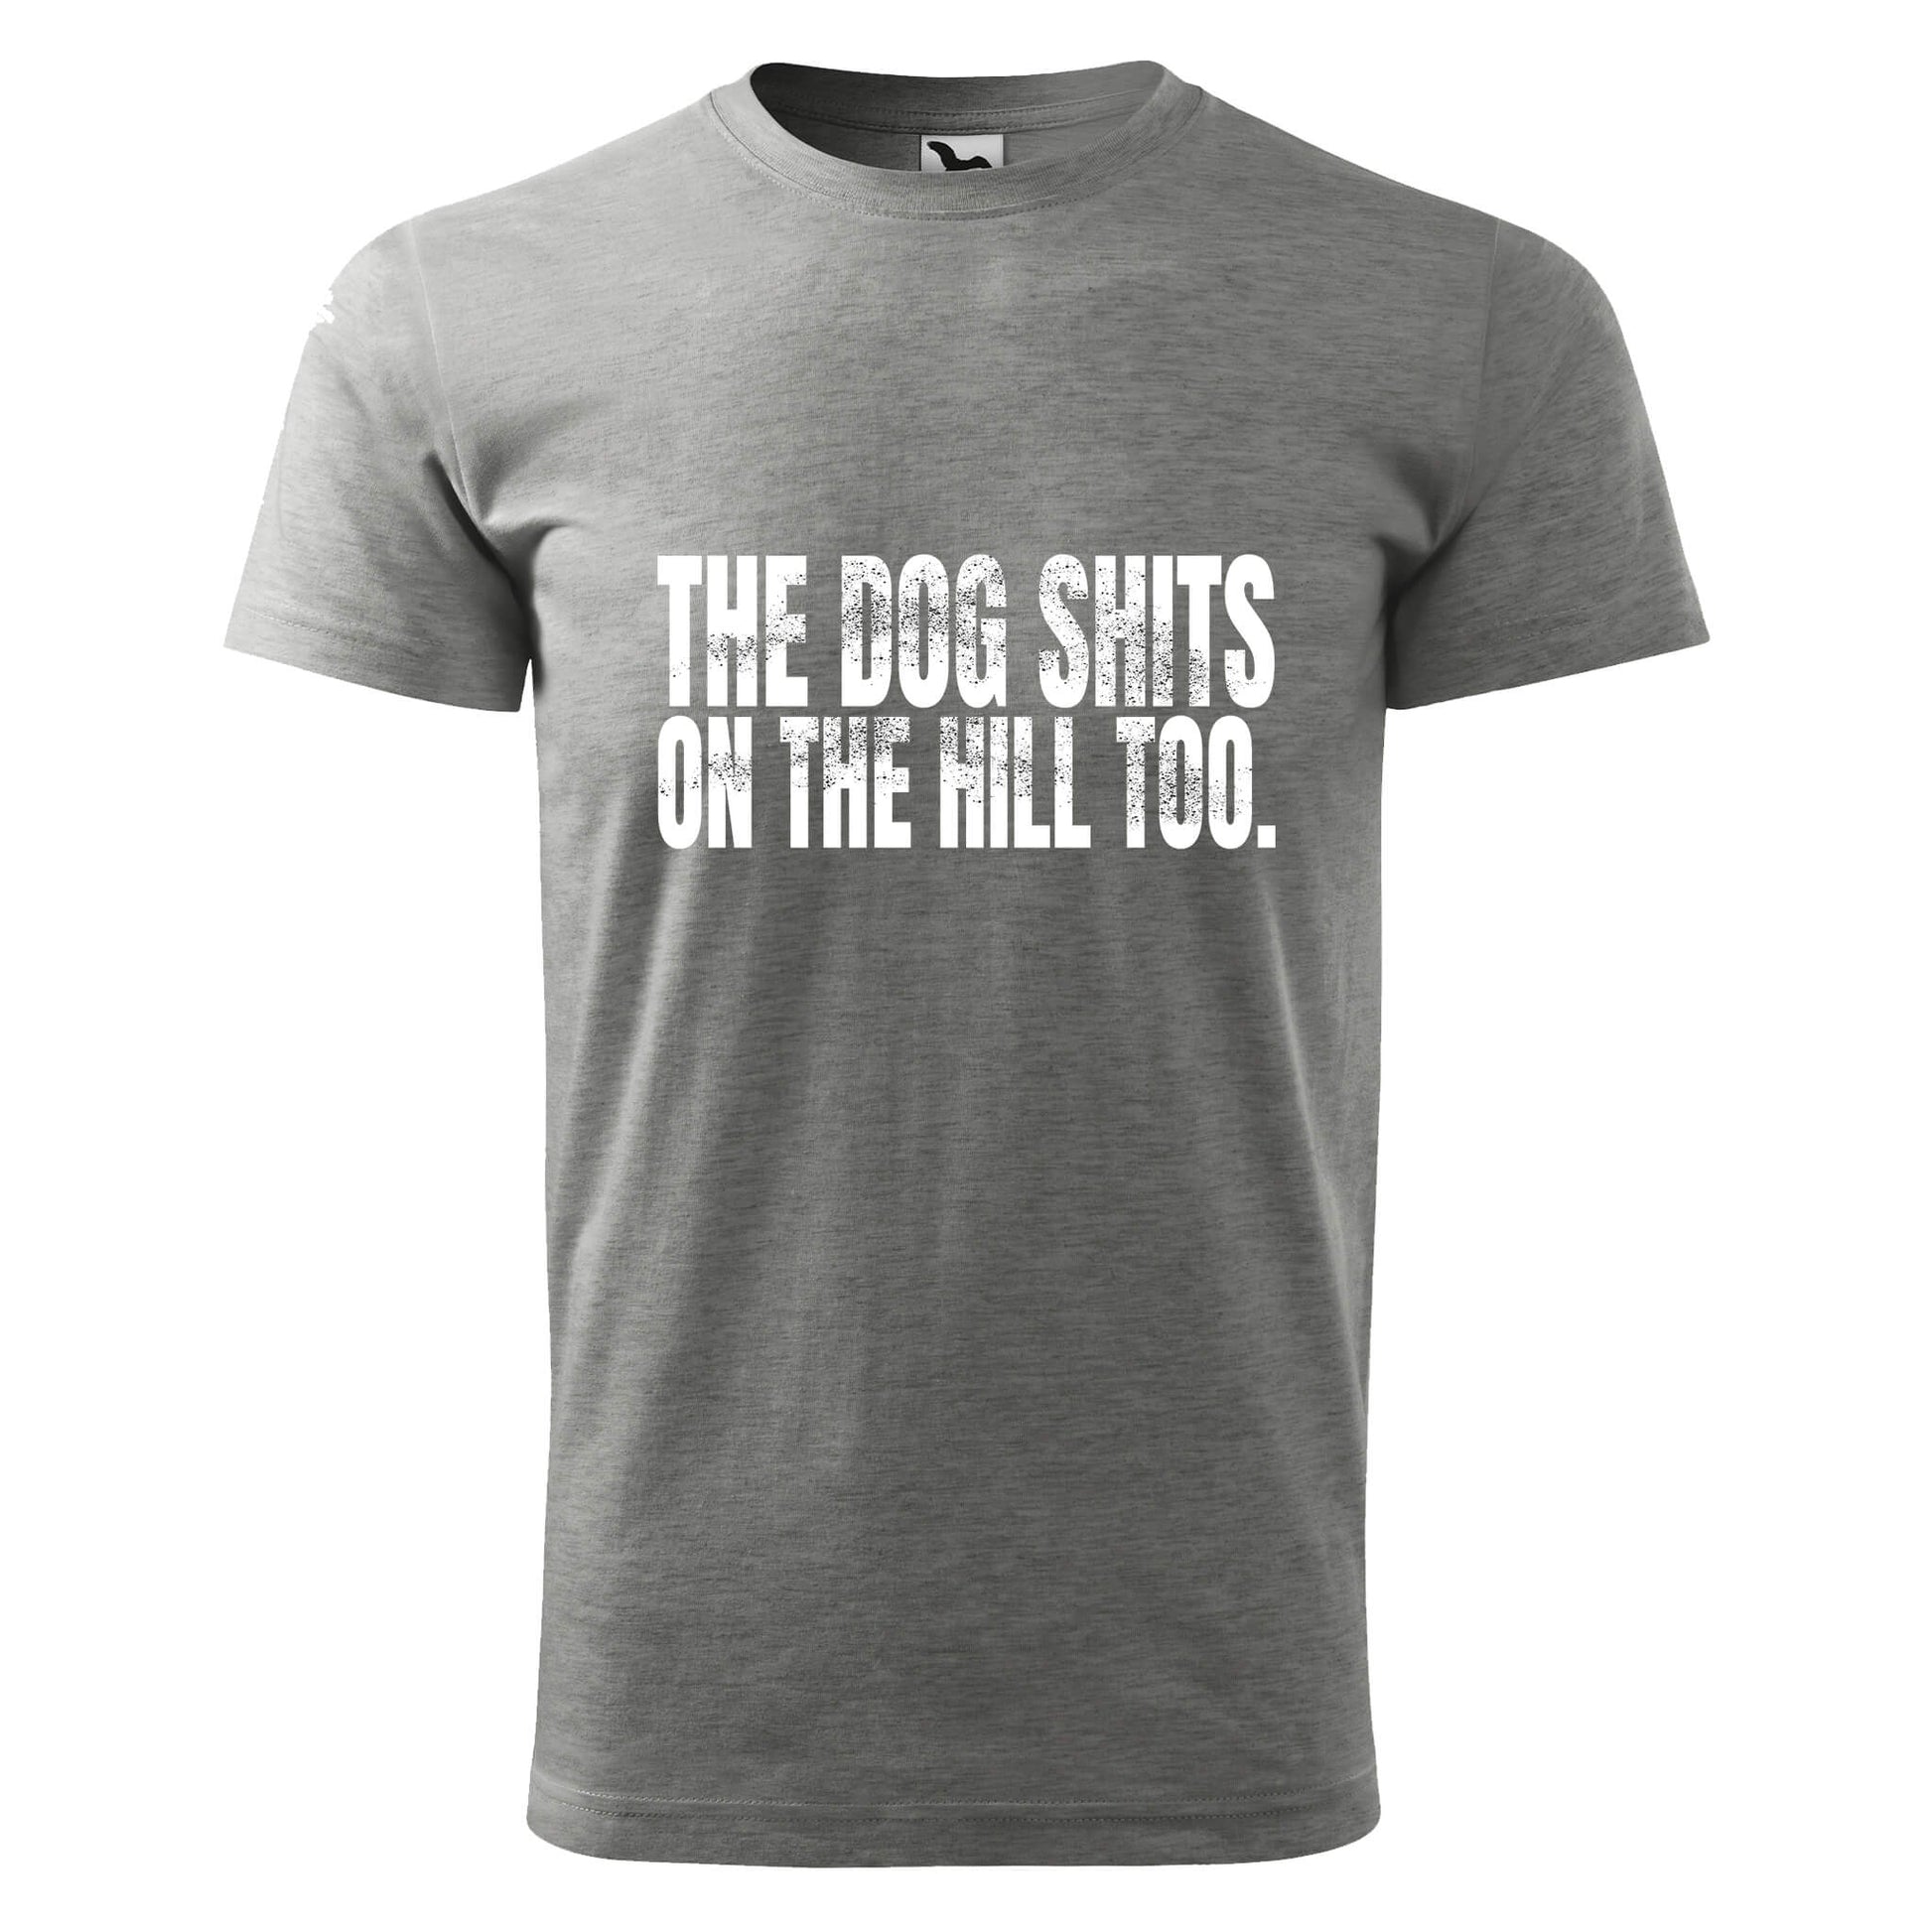 The dog shits on the hill too t-shirt - rvdesignprint